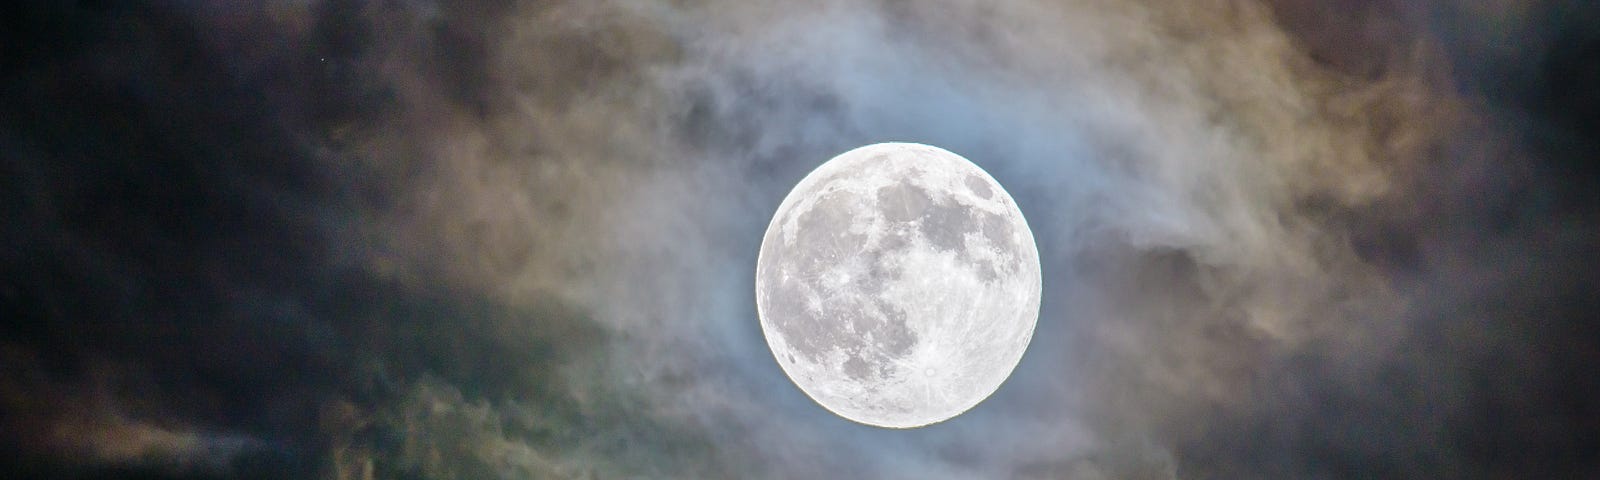 full moon on a partly cloudy note